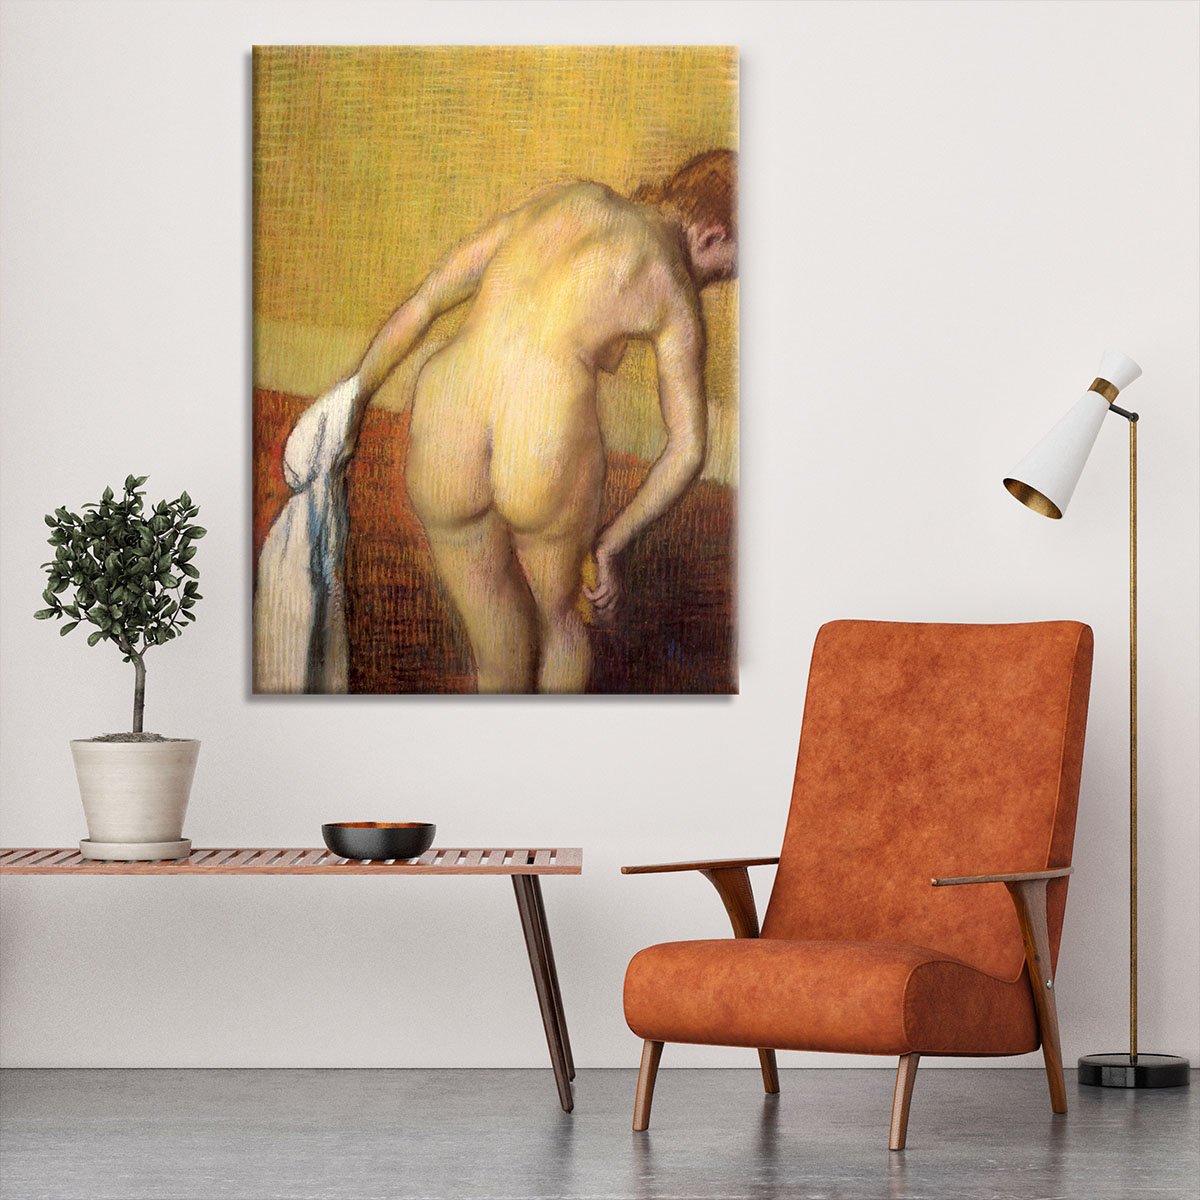 Woman Drying with towel and sponge by Degas Canvas Print or Poster